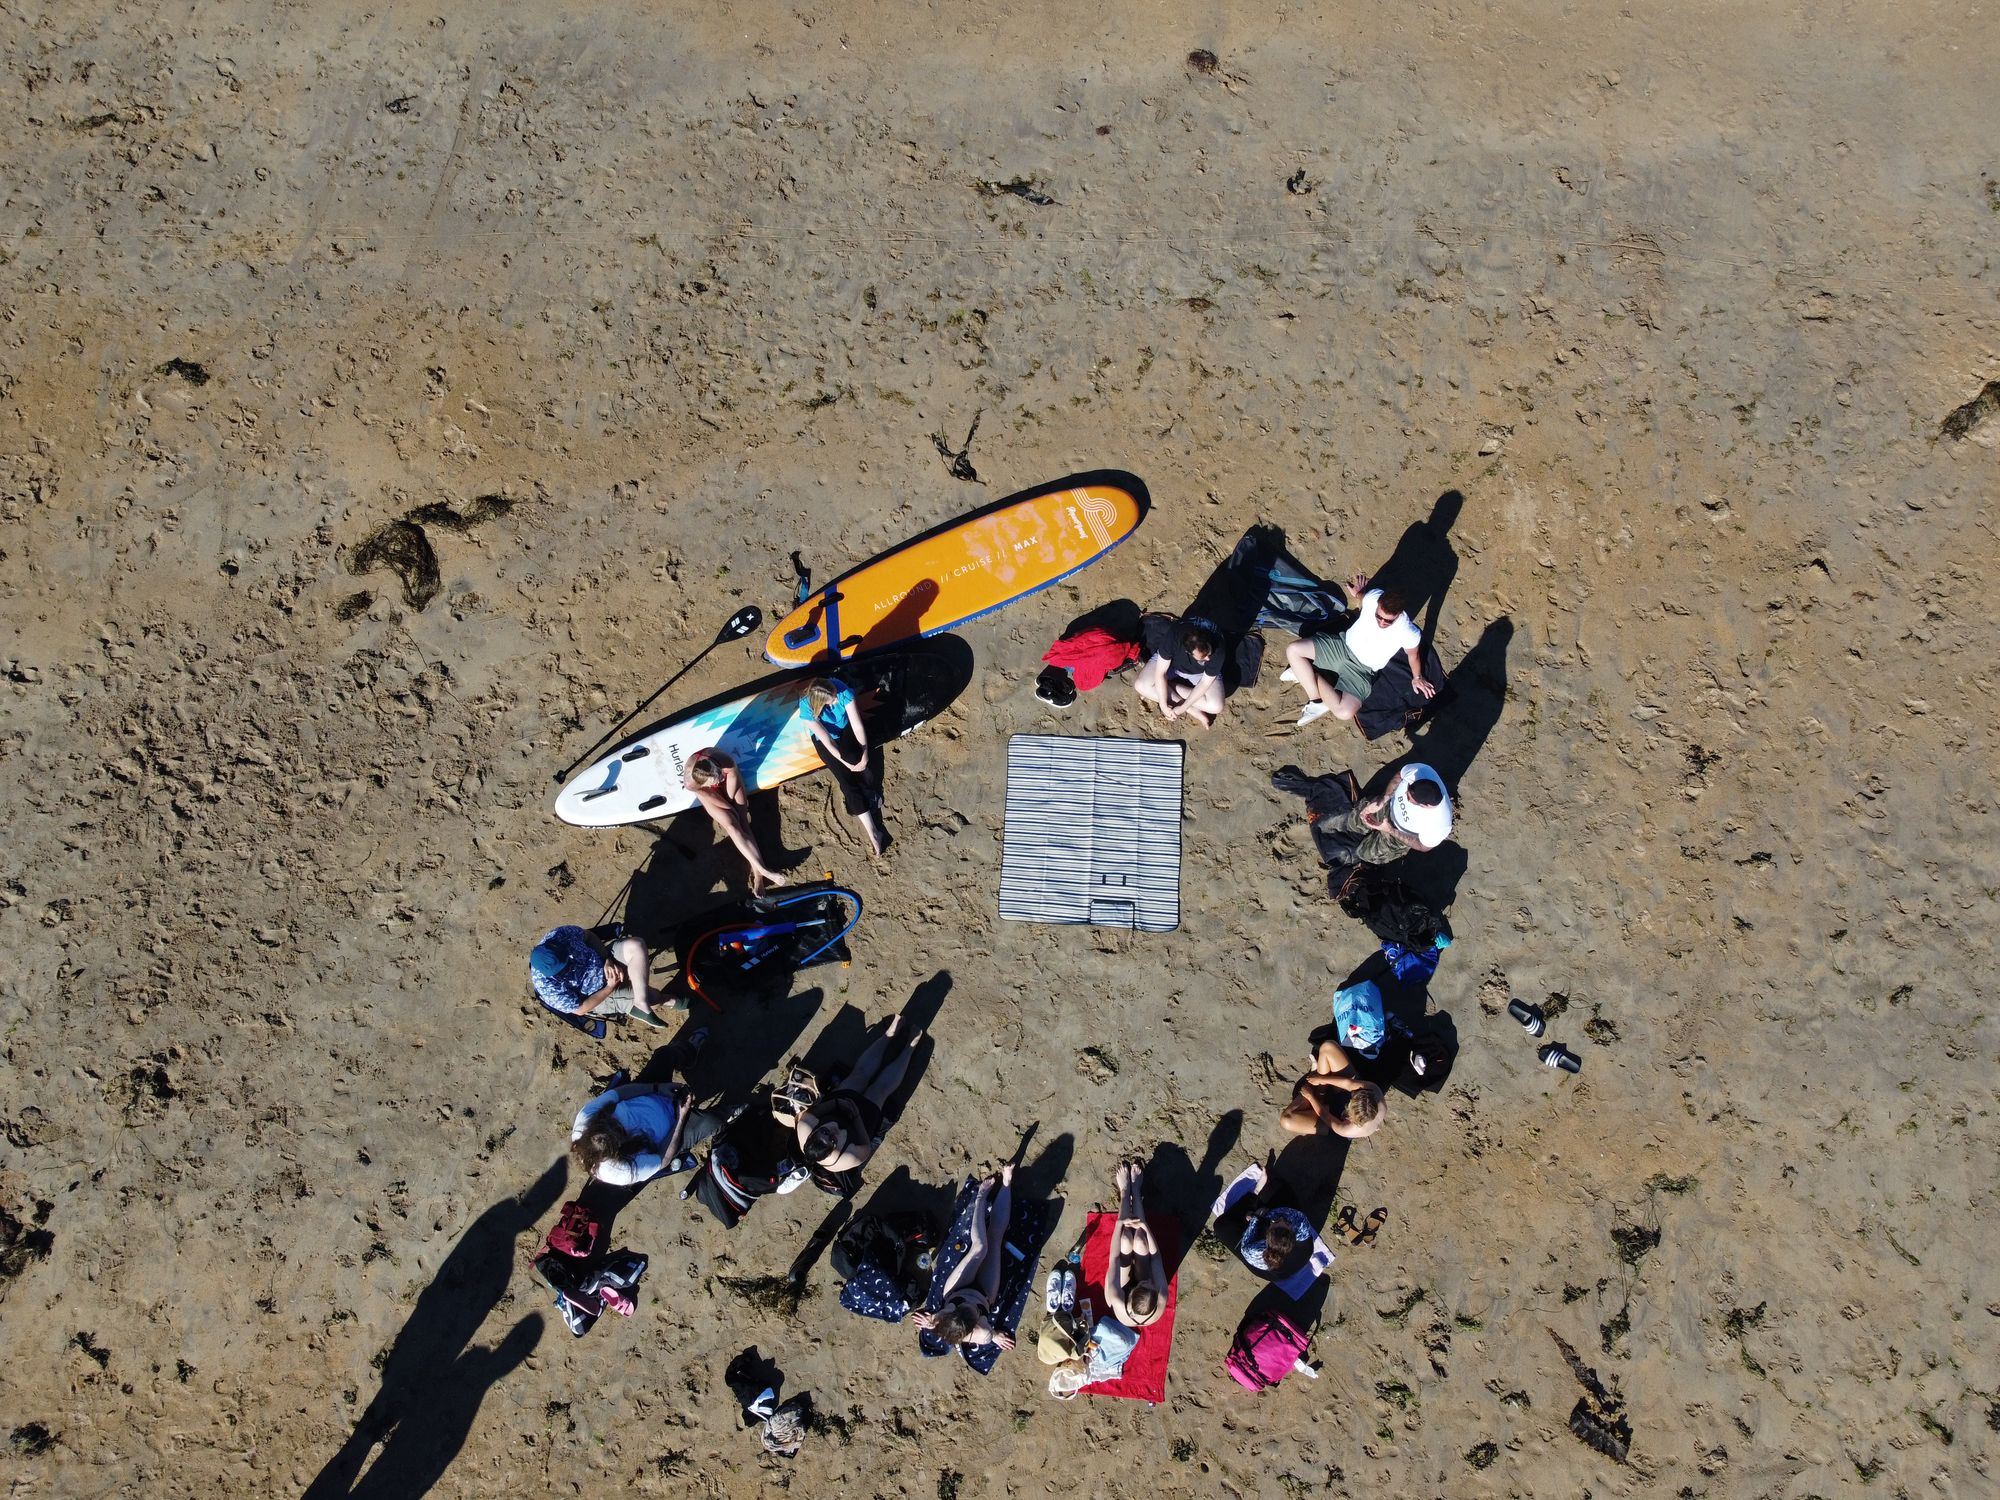 A drone photograph of a group of individuals sitting in a circle on the beach chatting